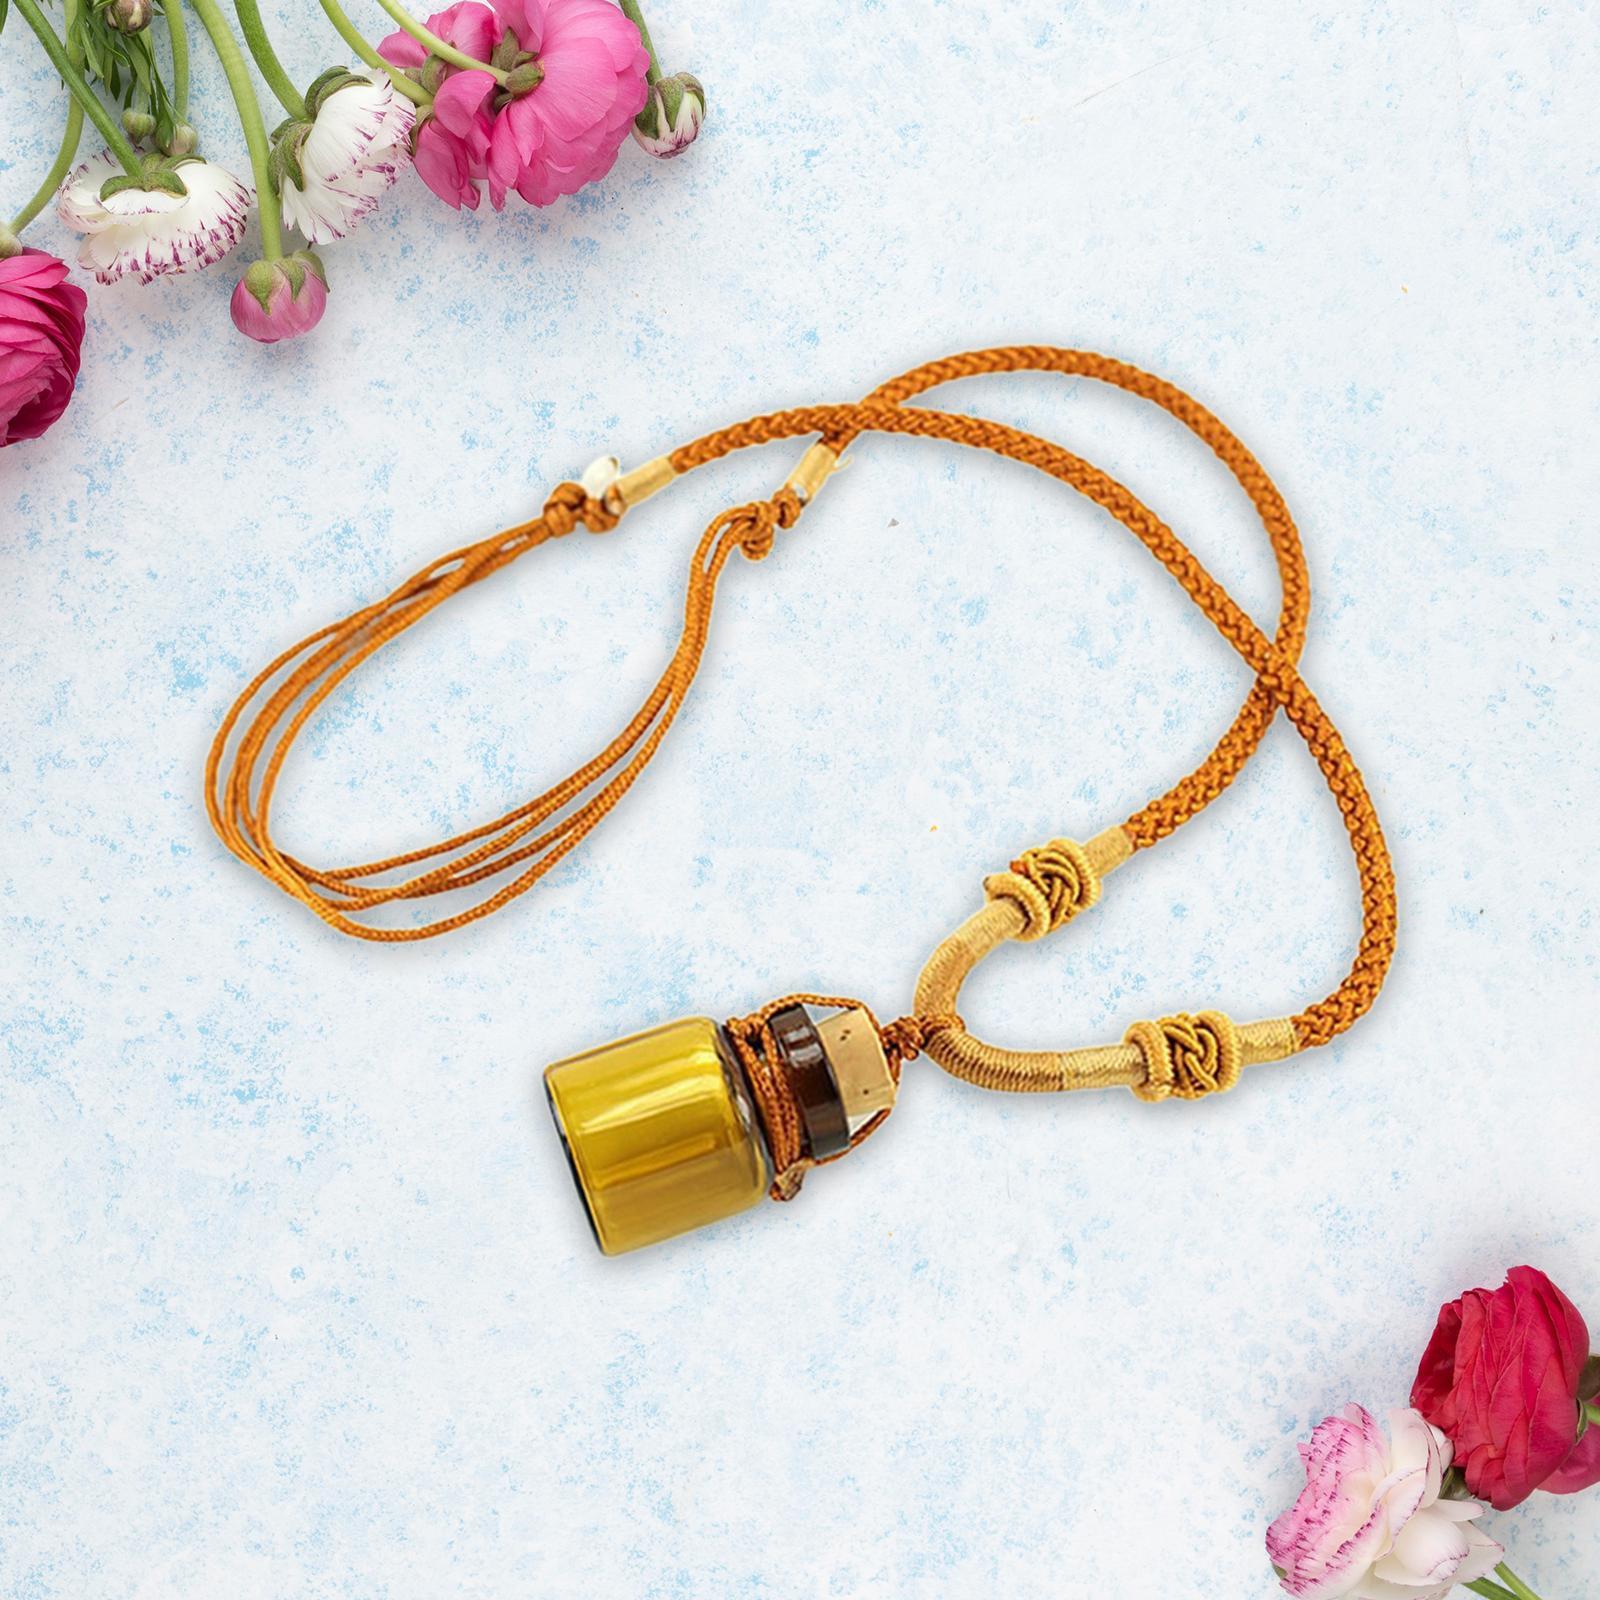 2ml Perfume Bottle Pendant Necklace fragrance Diffuser Necklace for Women Gift